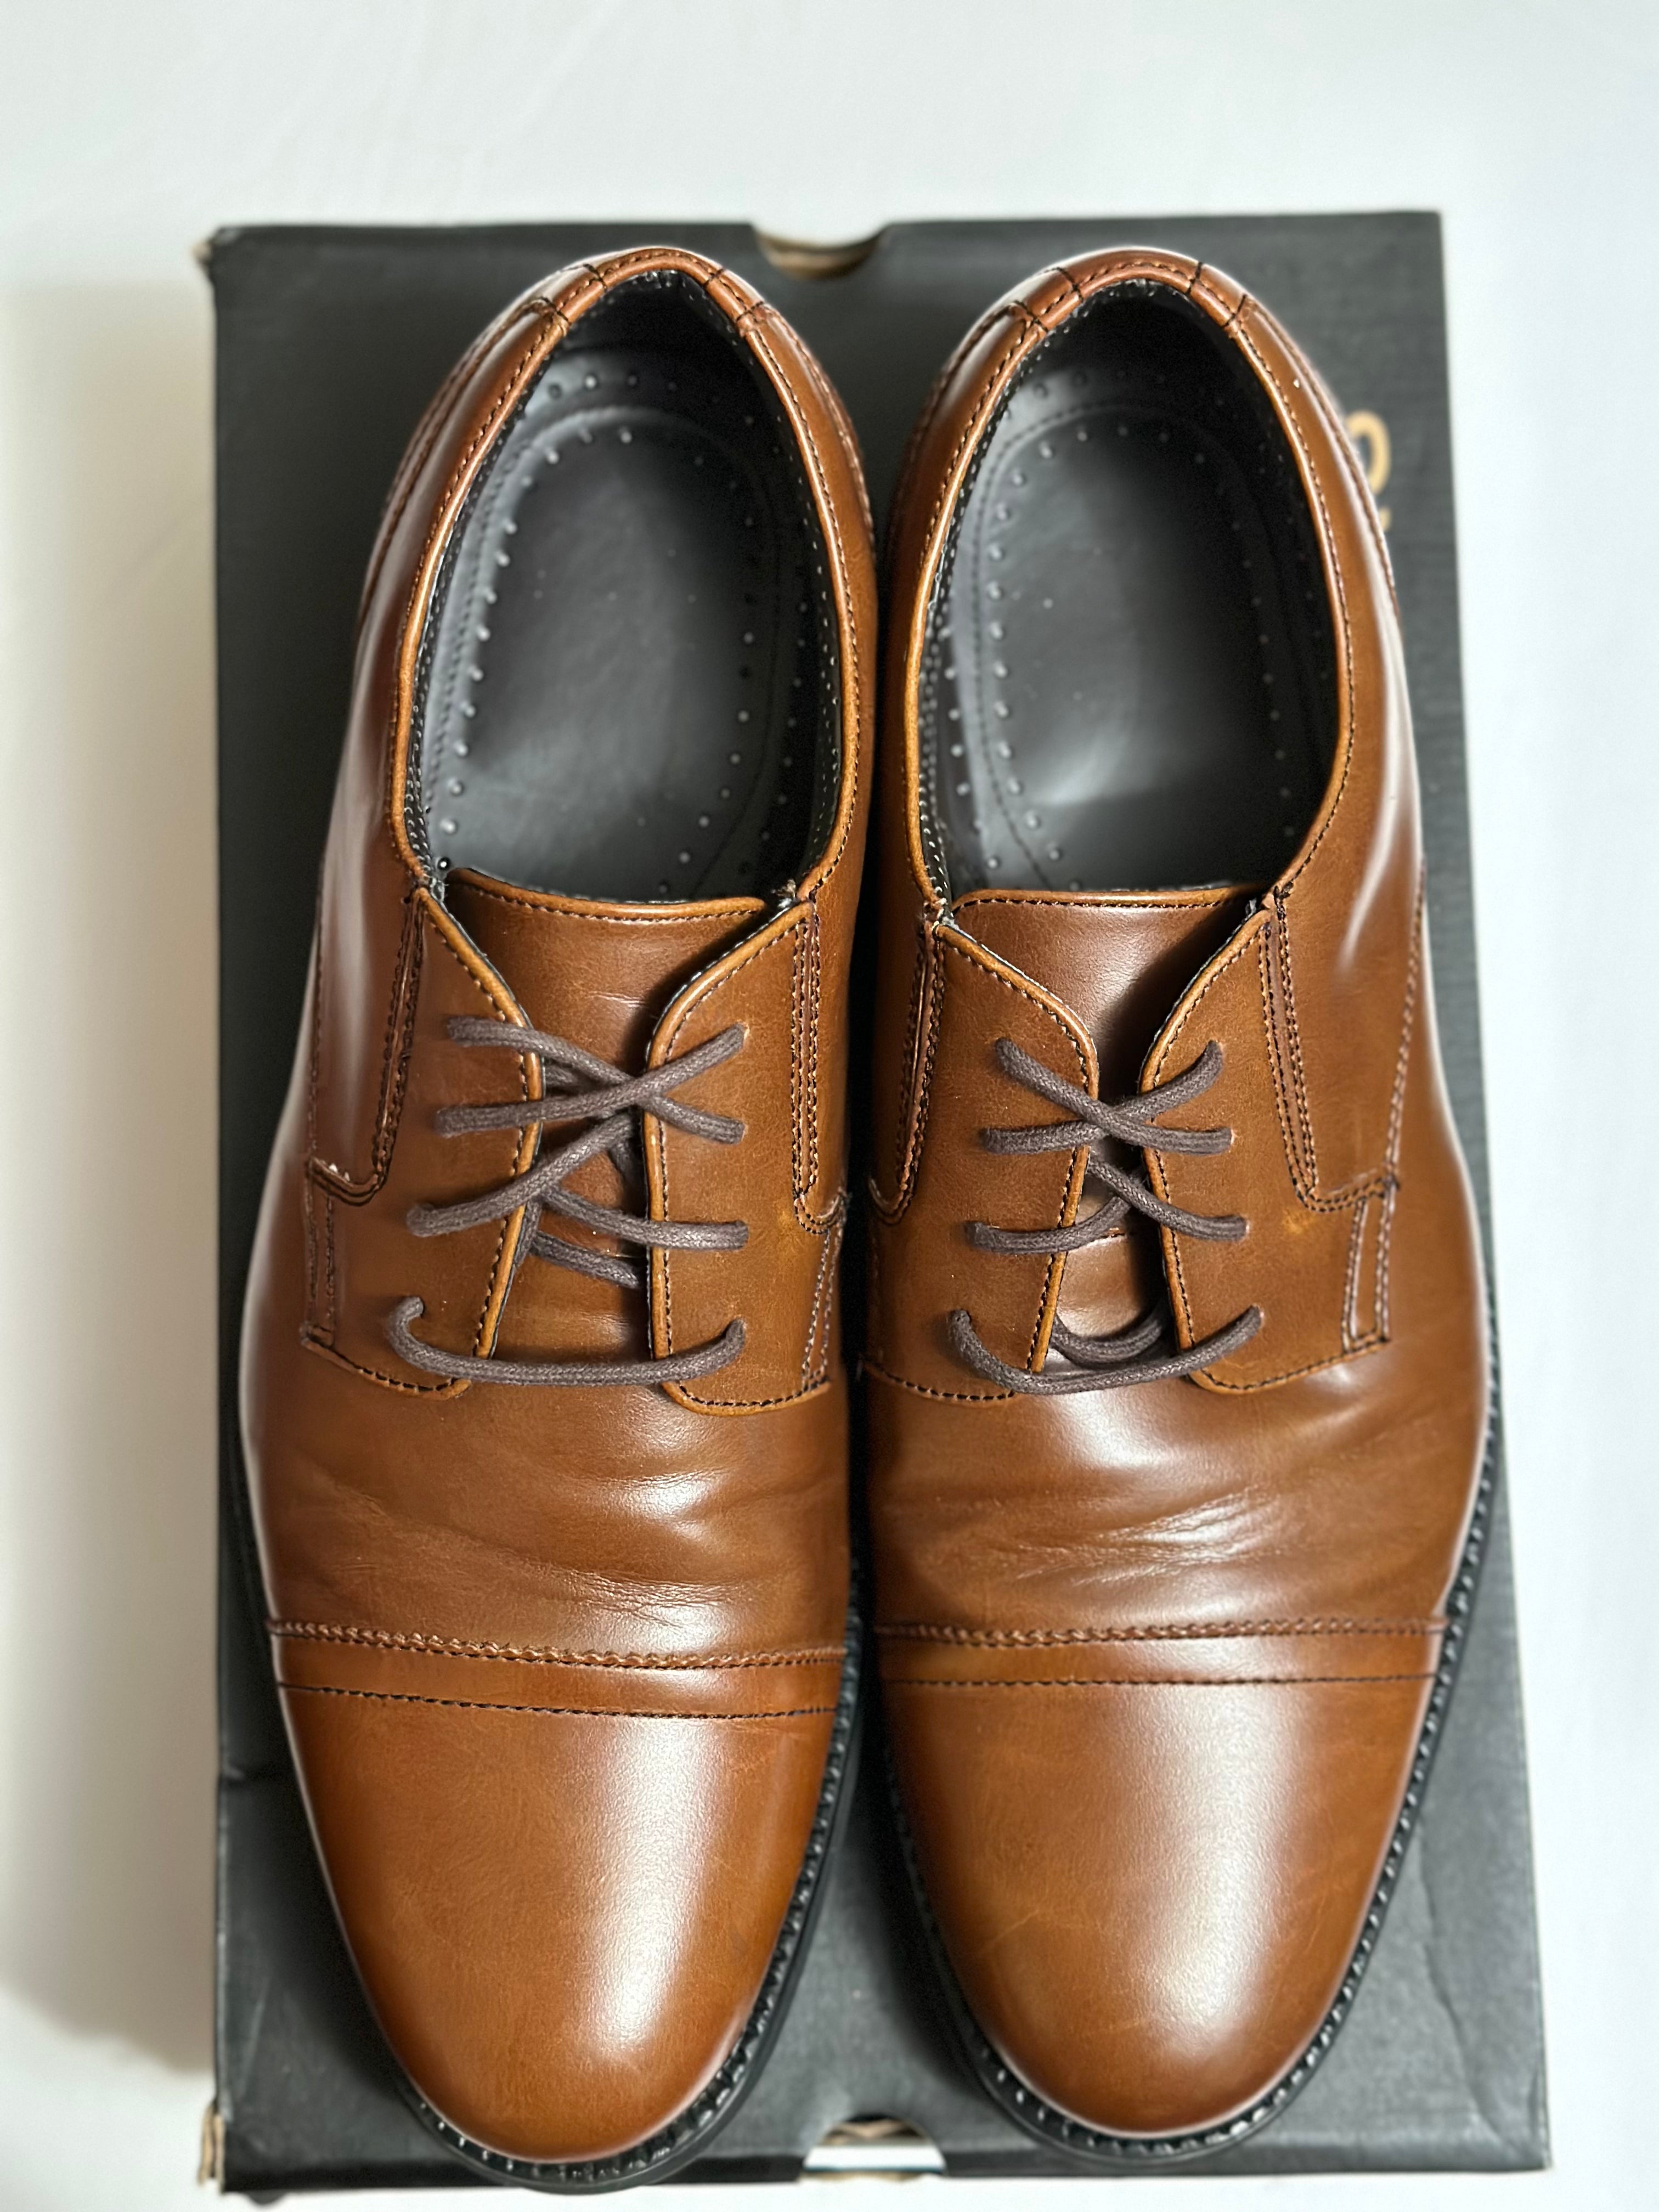 DOCKERS Oxford Brown Dress Shoes in size 11